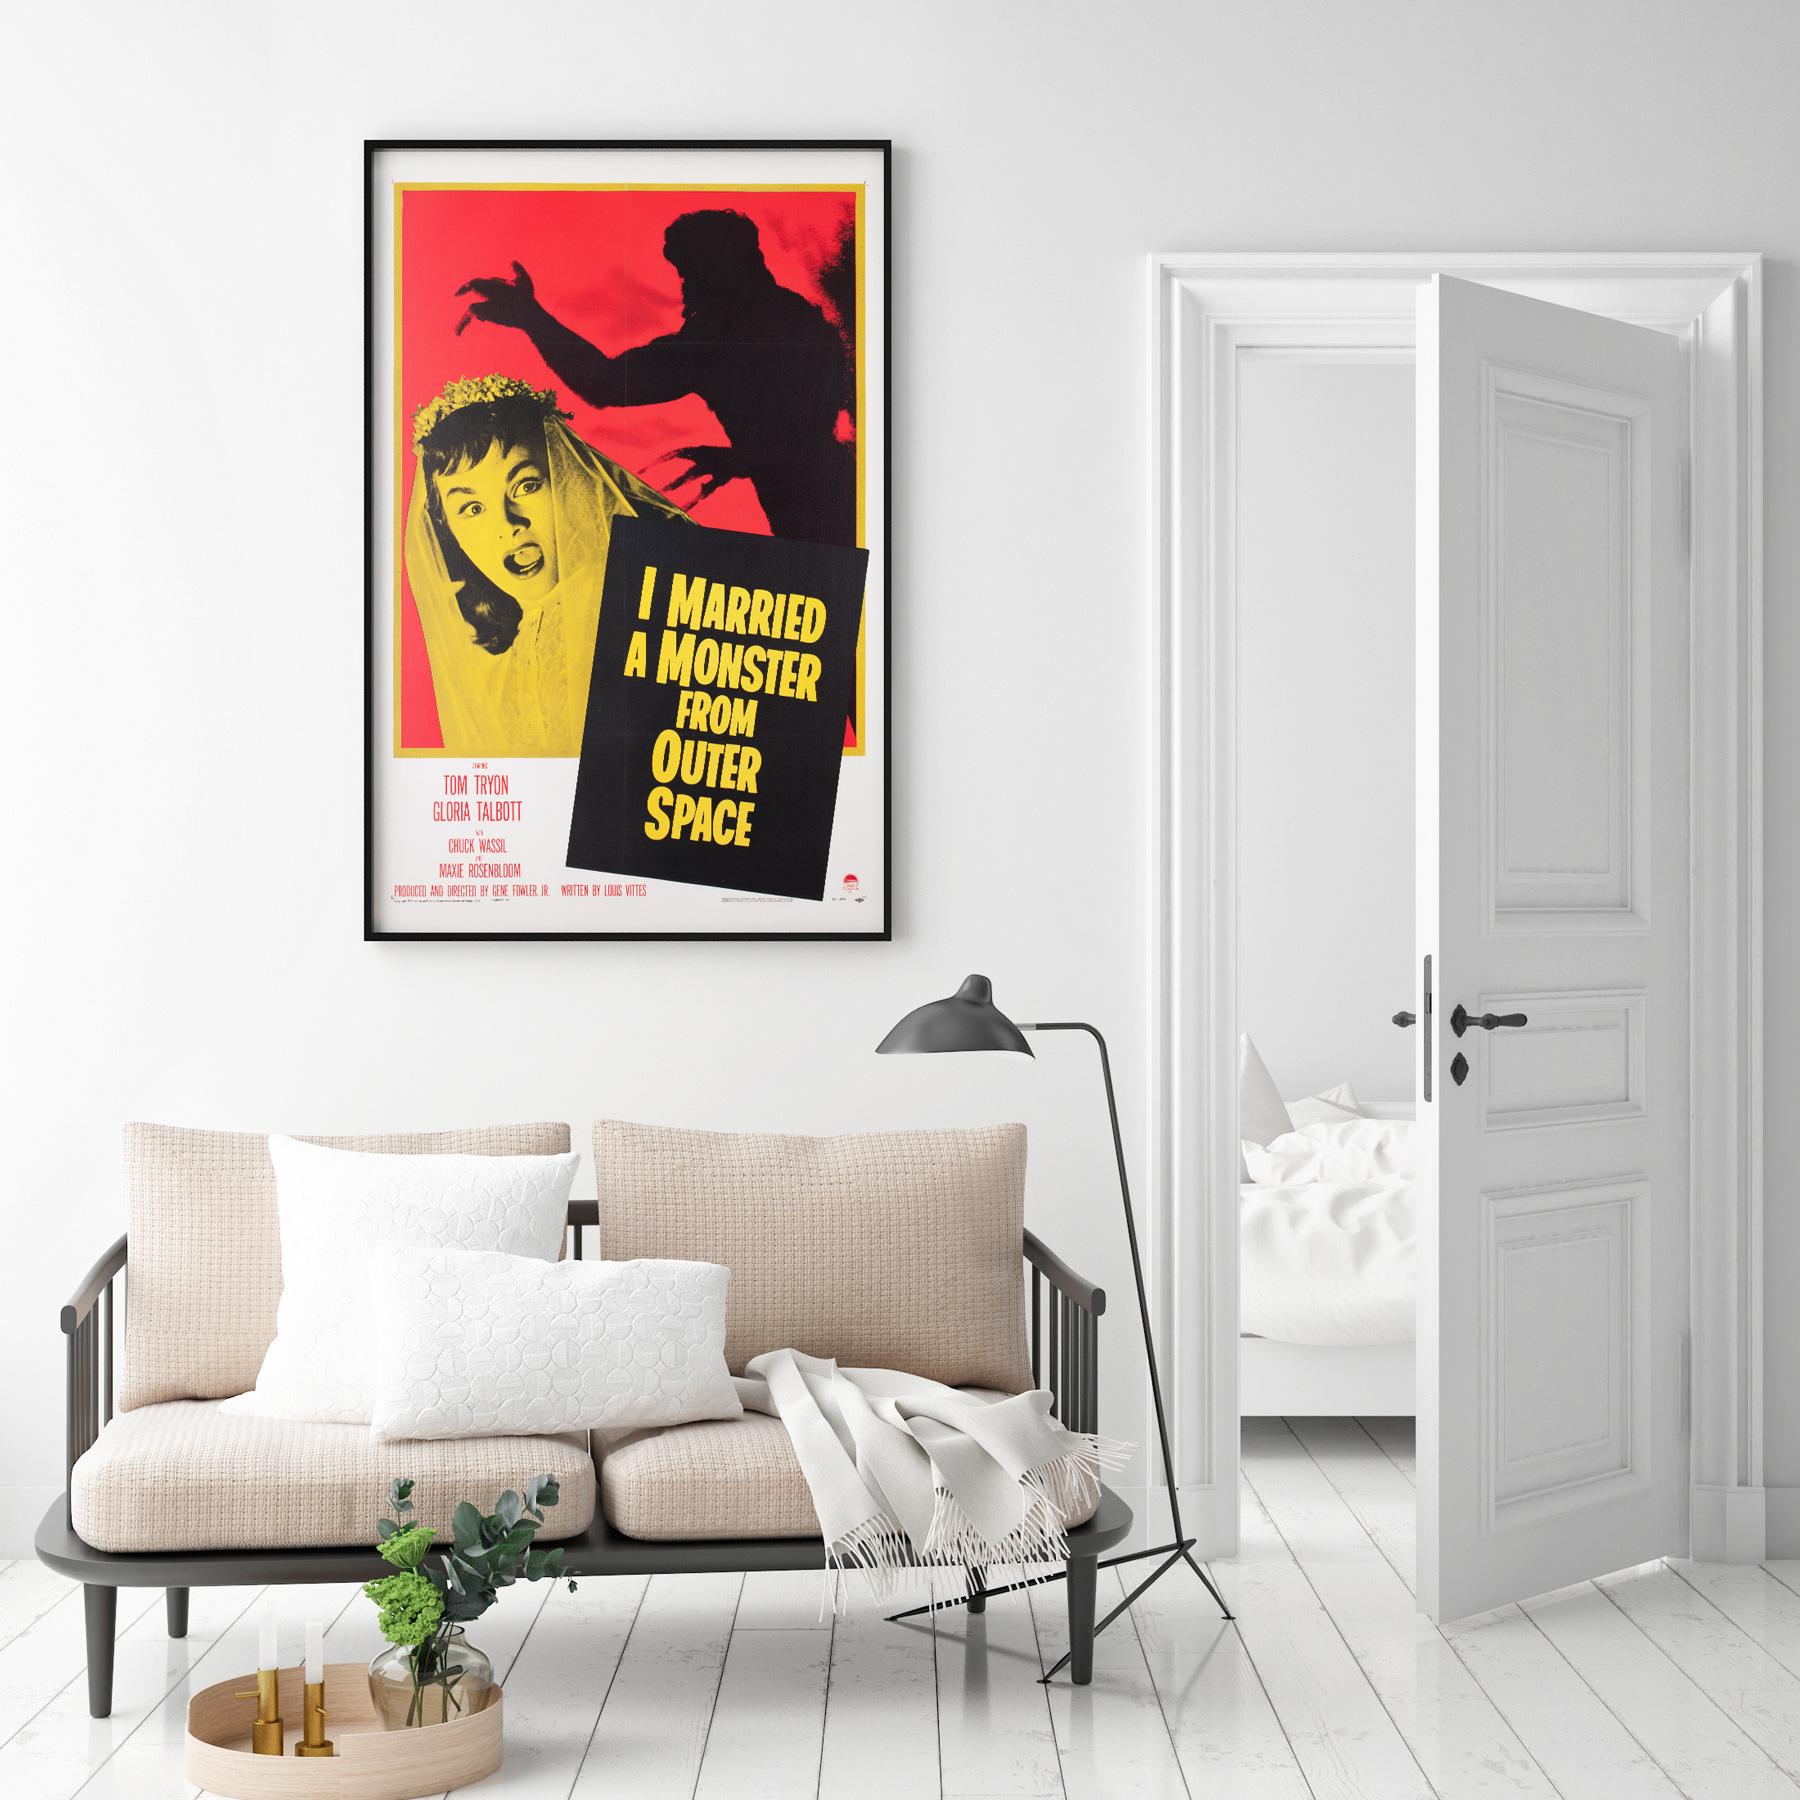 Wonderfull kitsch deaign features on the country-of-origin American film poster for 50s sci0fi horror I Married a Monster from Outer Space. We adore the bright, bold, garish even design... the perfect cheeky gift for the other half!

Despite the